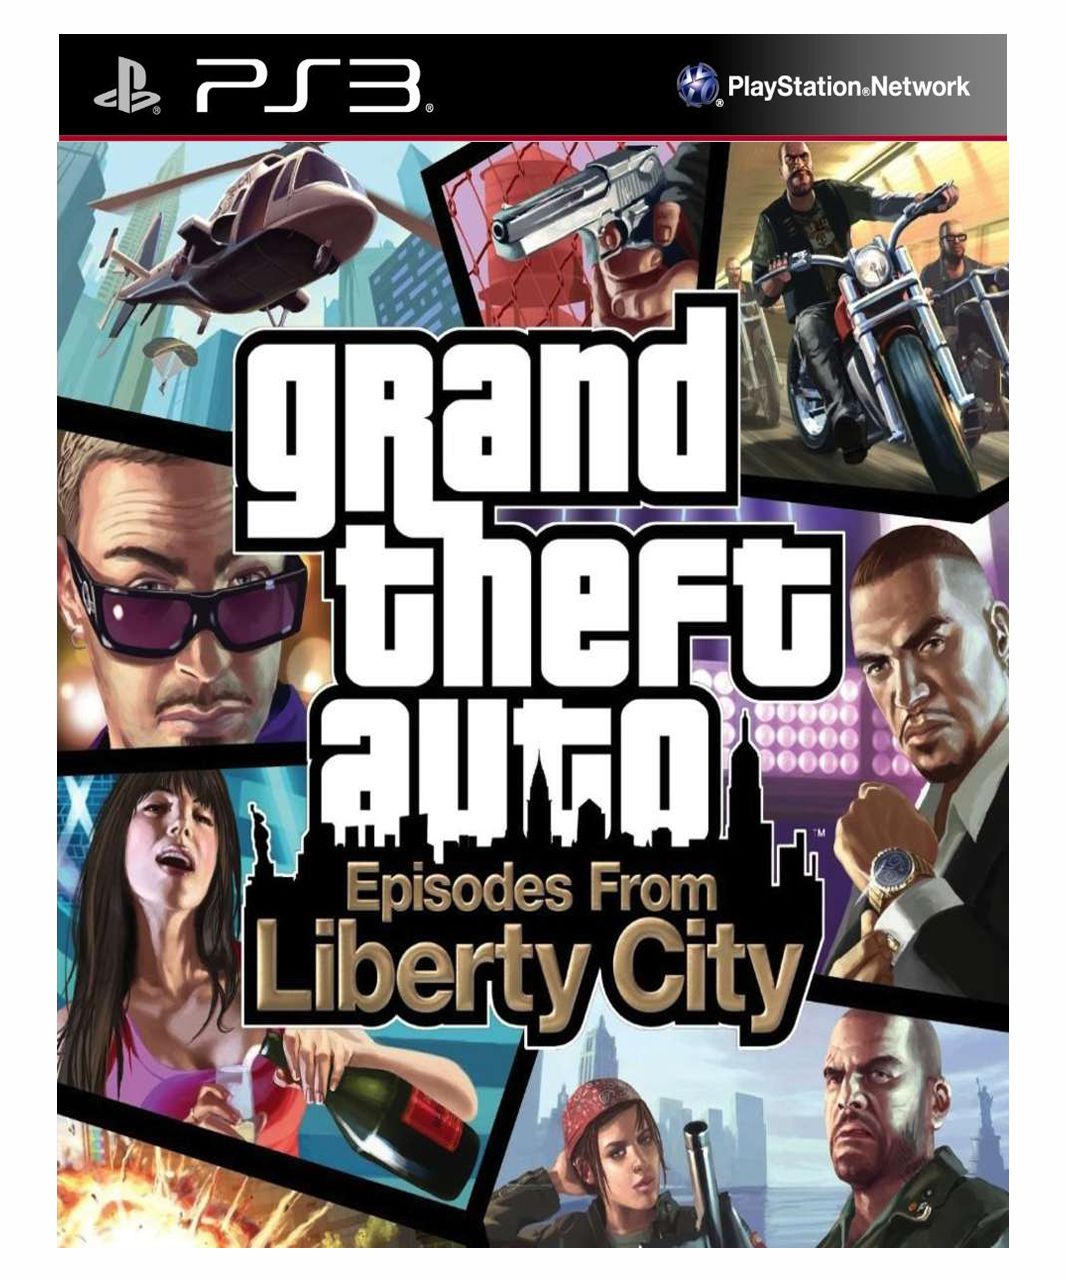 Jogo Grand Theft Auto IV & Episodes From Liberty City: The